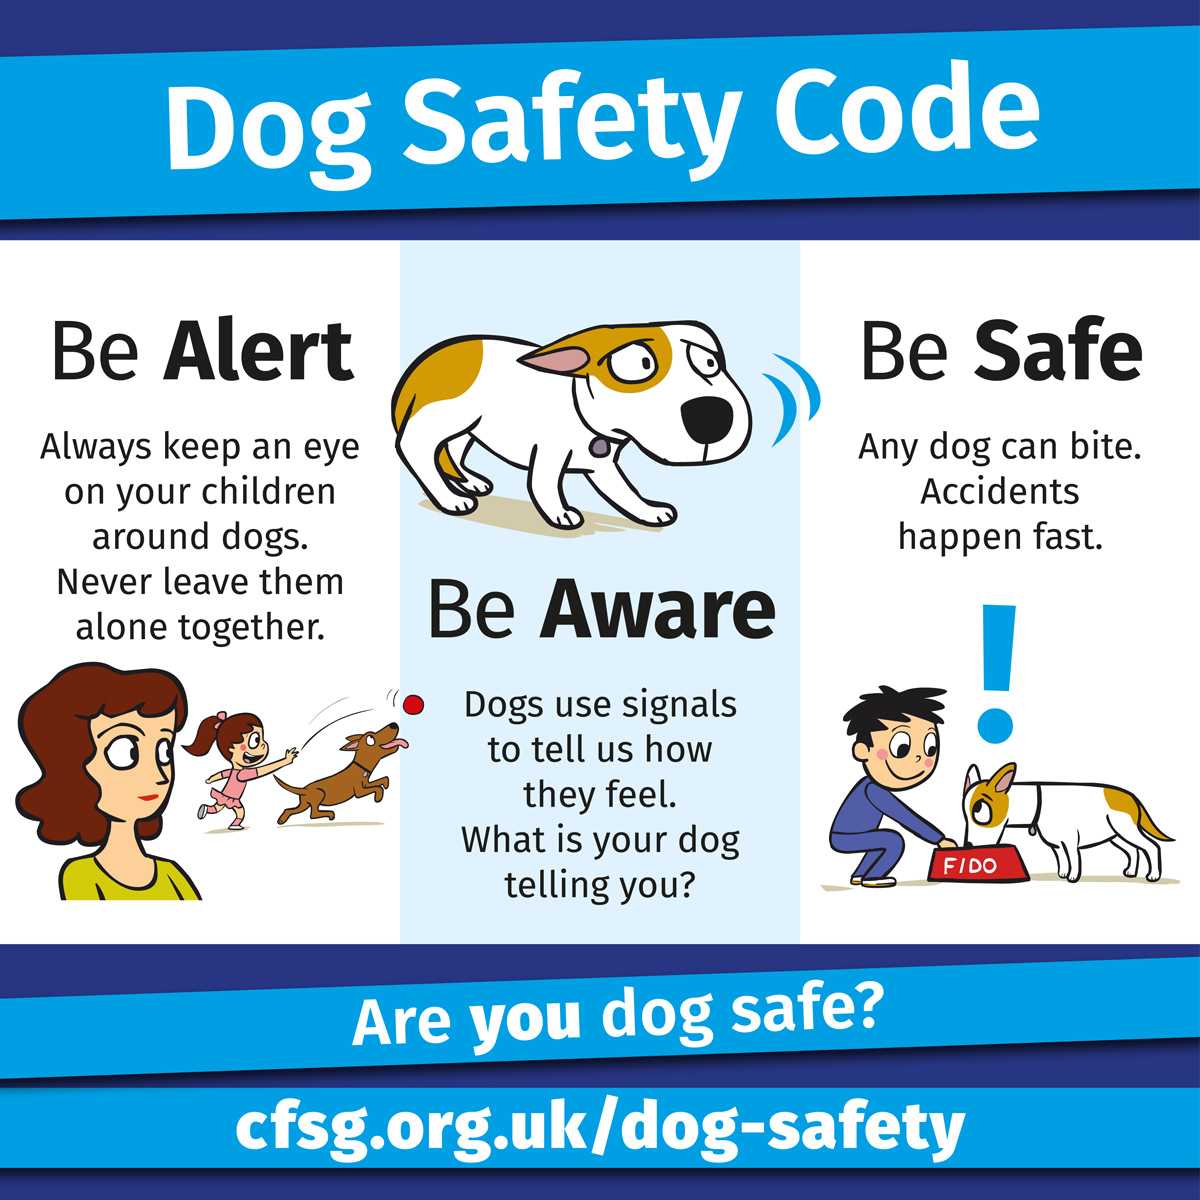 Are you concerned for the safety of your dog?